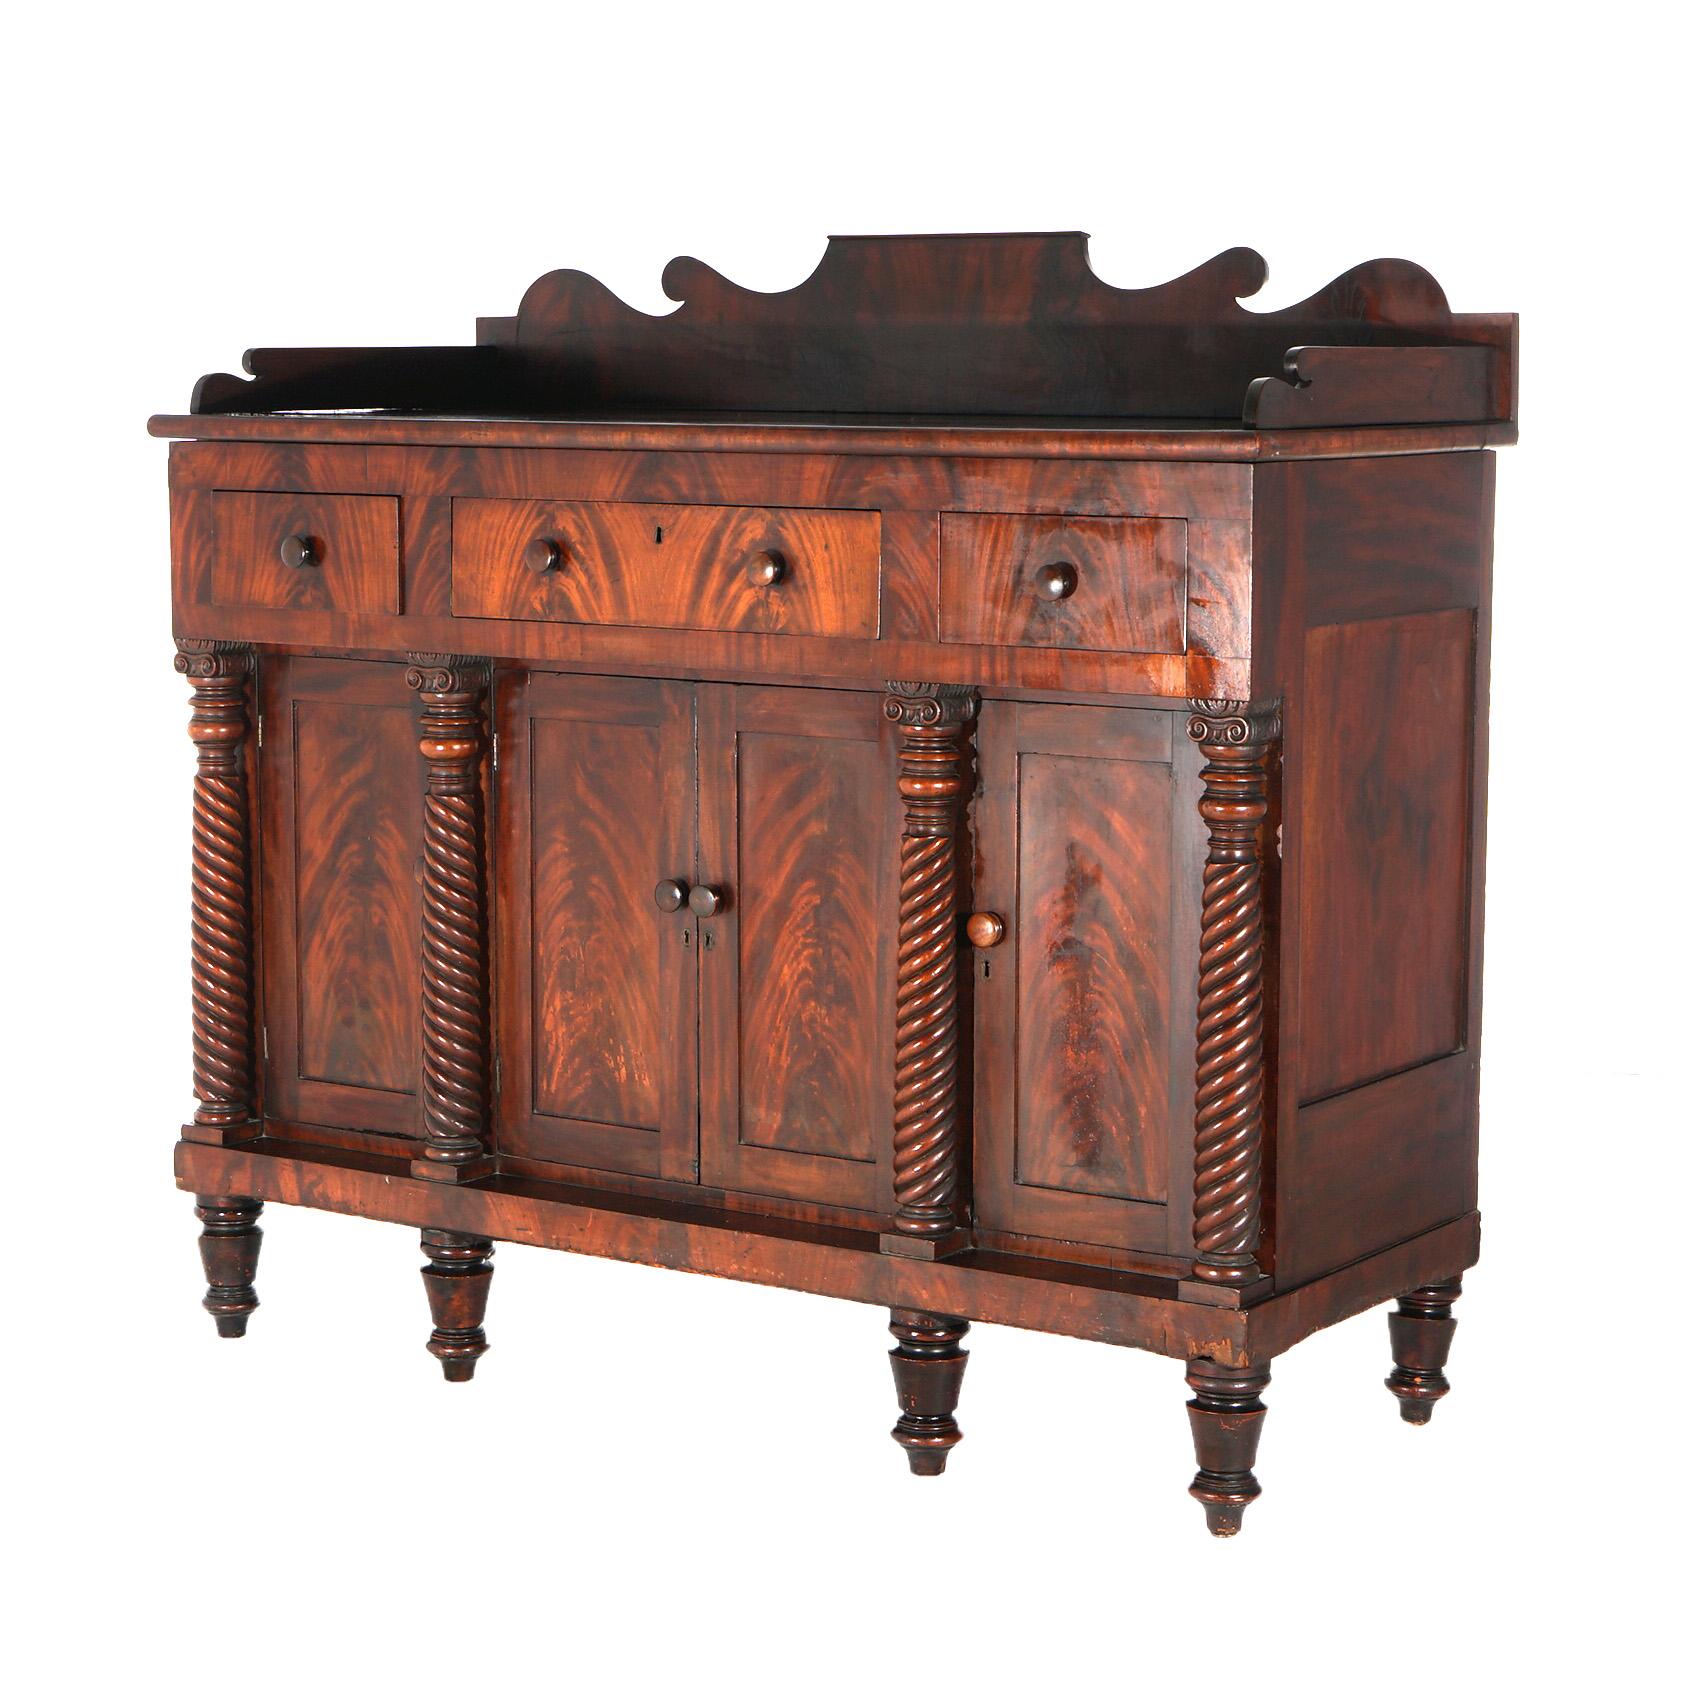 An antique American Empire Classical Greco sideboard offers flame mahogany paneled construction with scroll for backsplash over case with upper drawers over lower cabinets flanked by rope twist Corinthian column supports, c1860

Measures - 53.5